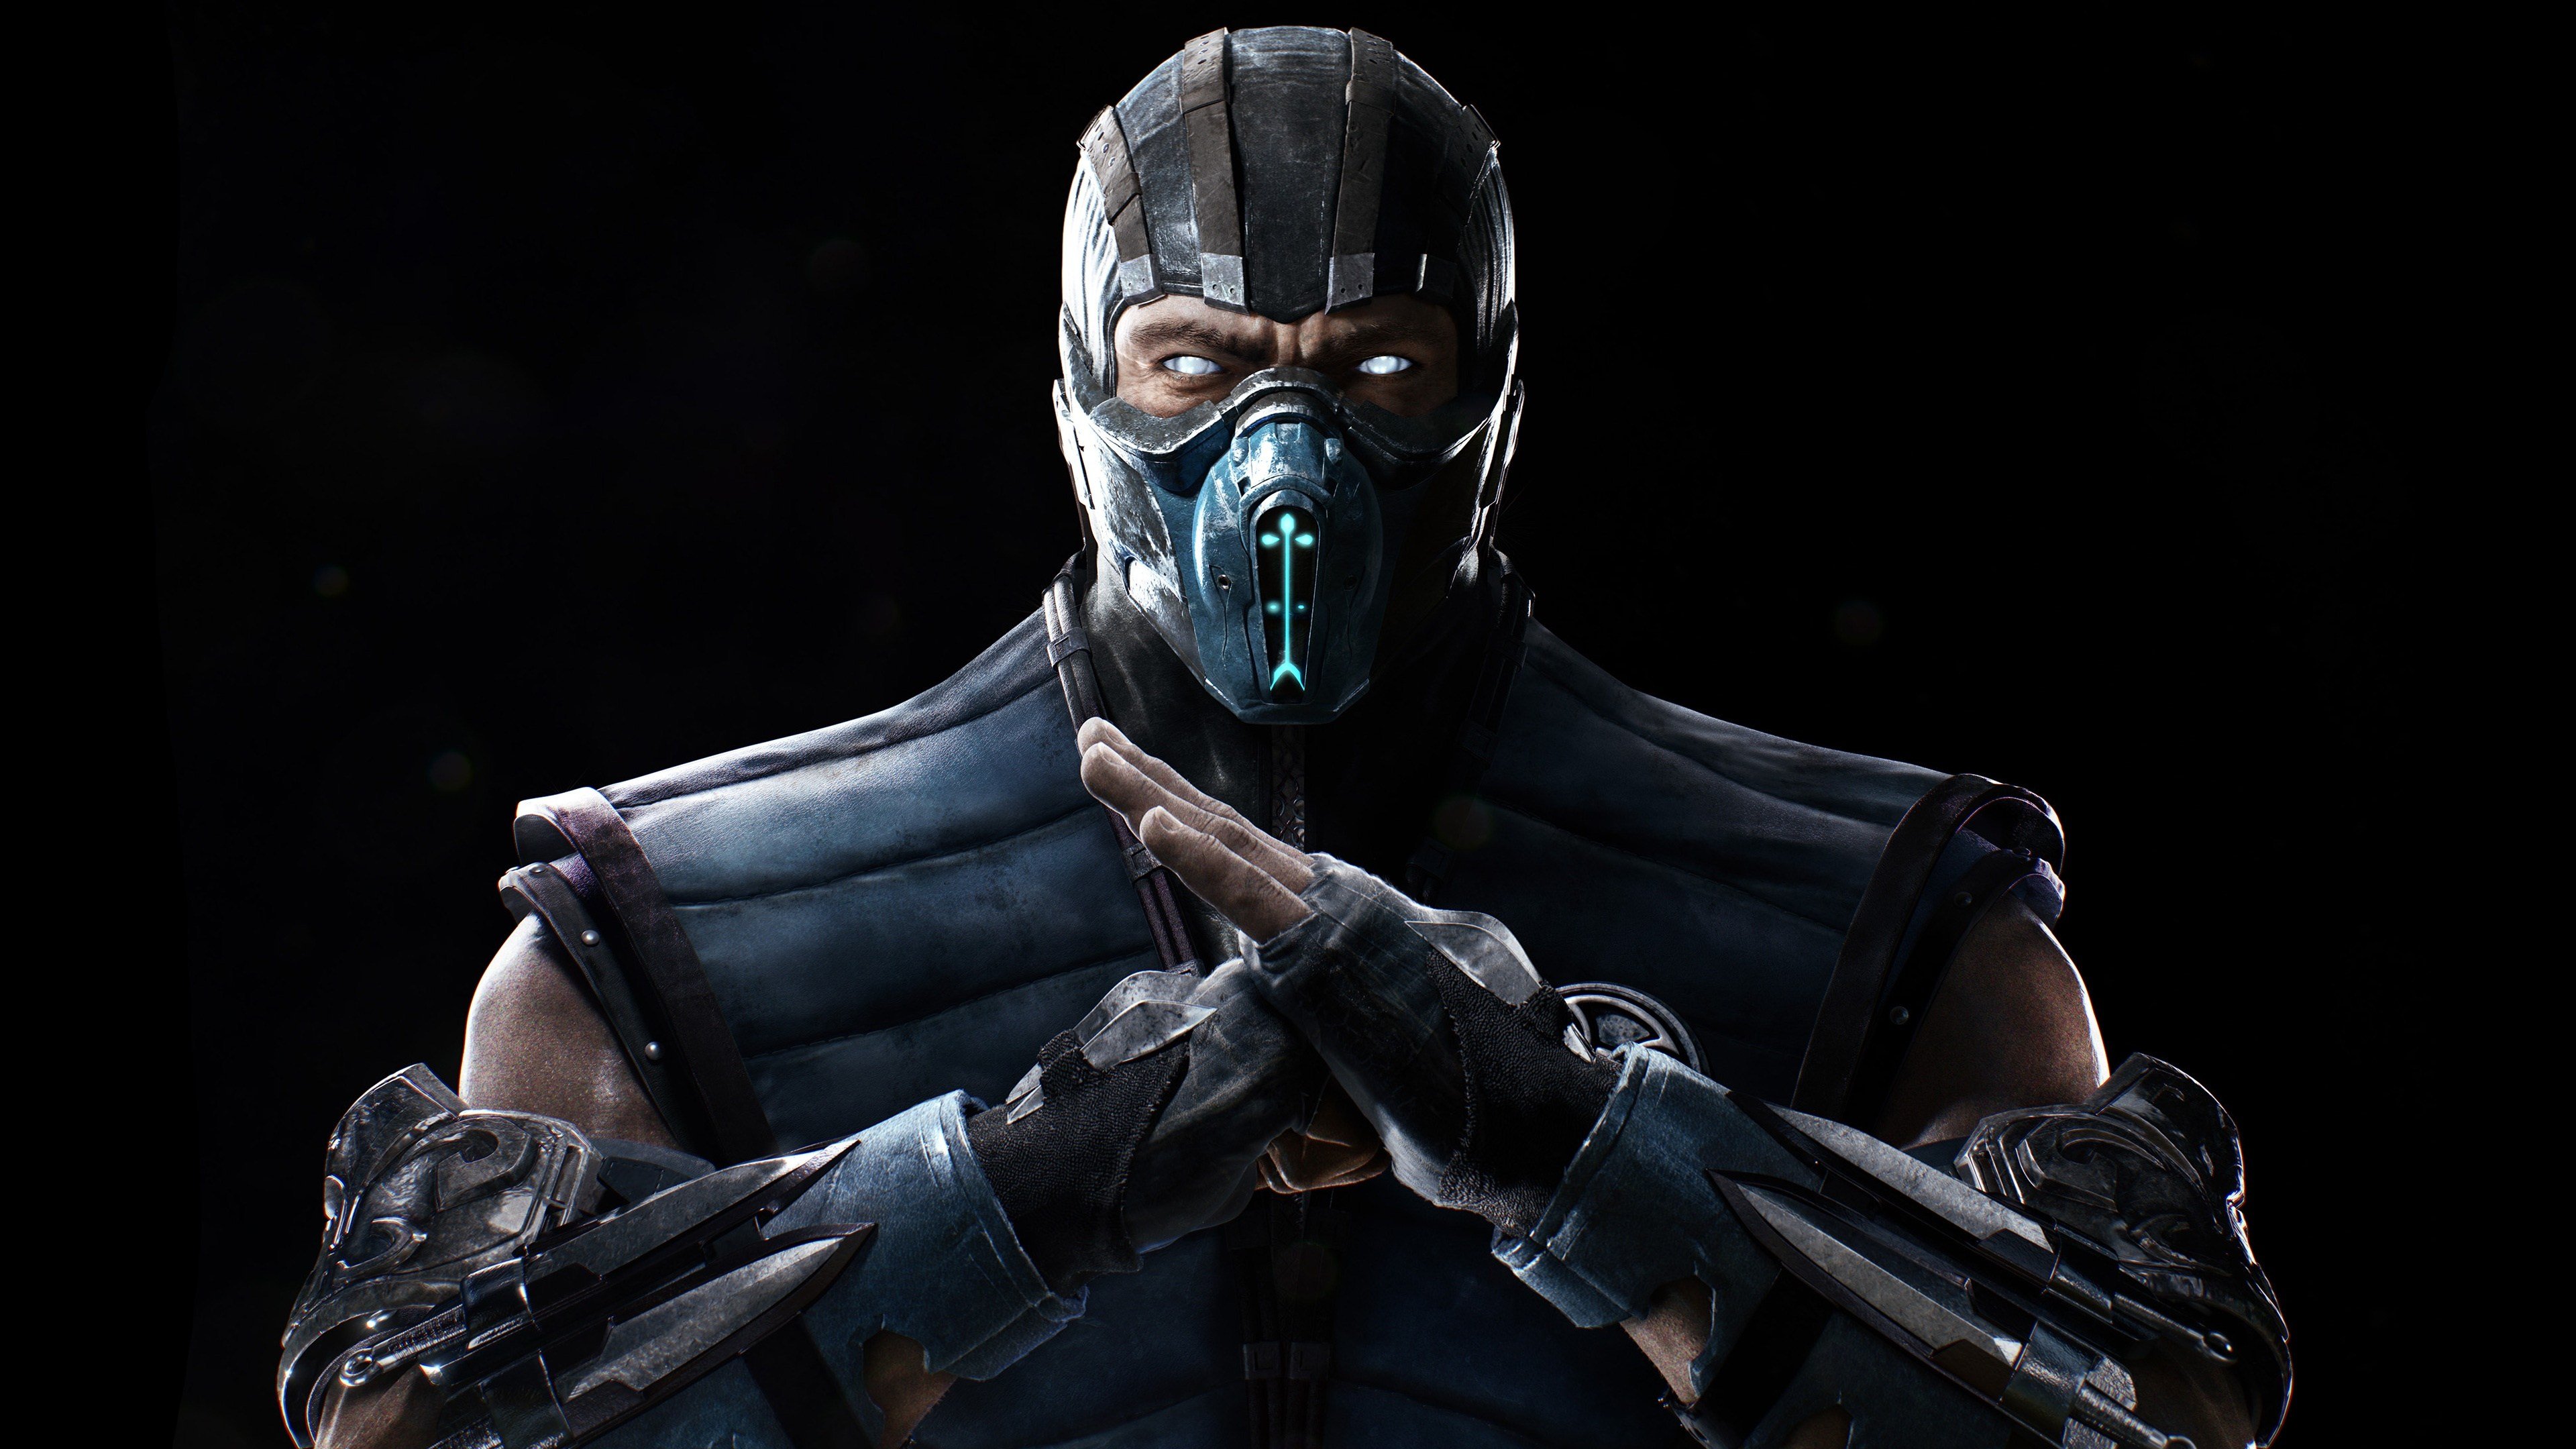 mortal kombat wallpaper,pc game,shooter game,personal protective equipment,games,action adventure game